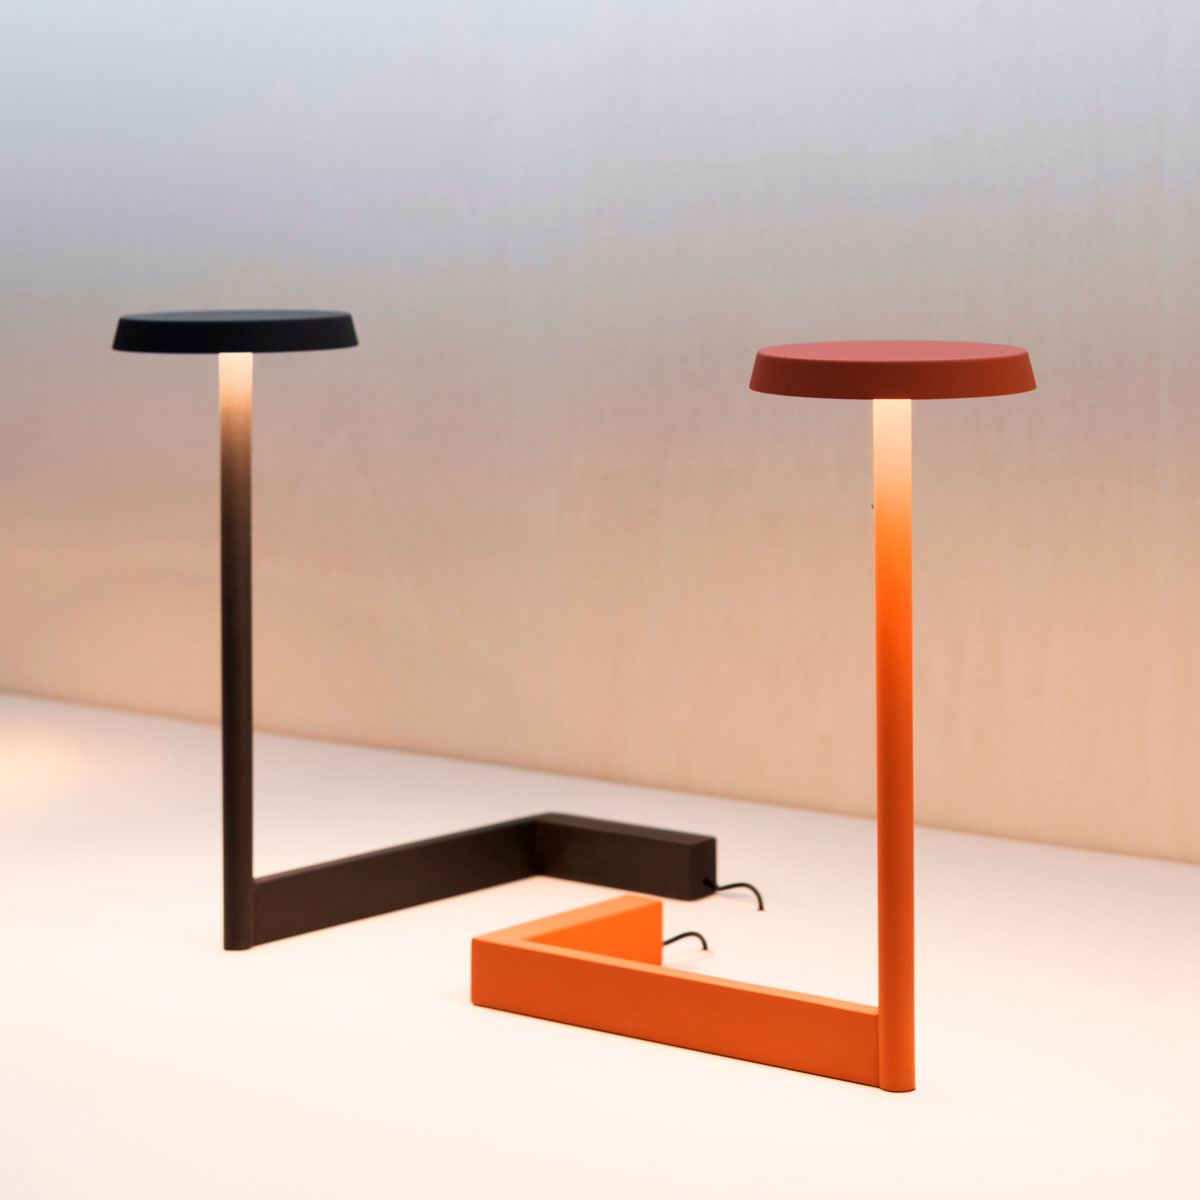 Vibia The Edit - Layers of Light: the Flat collecion